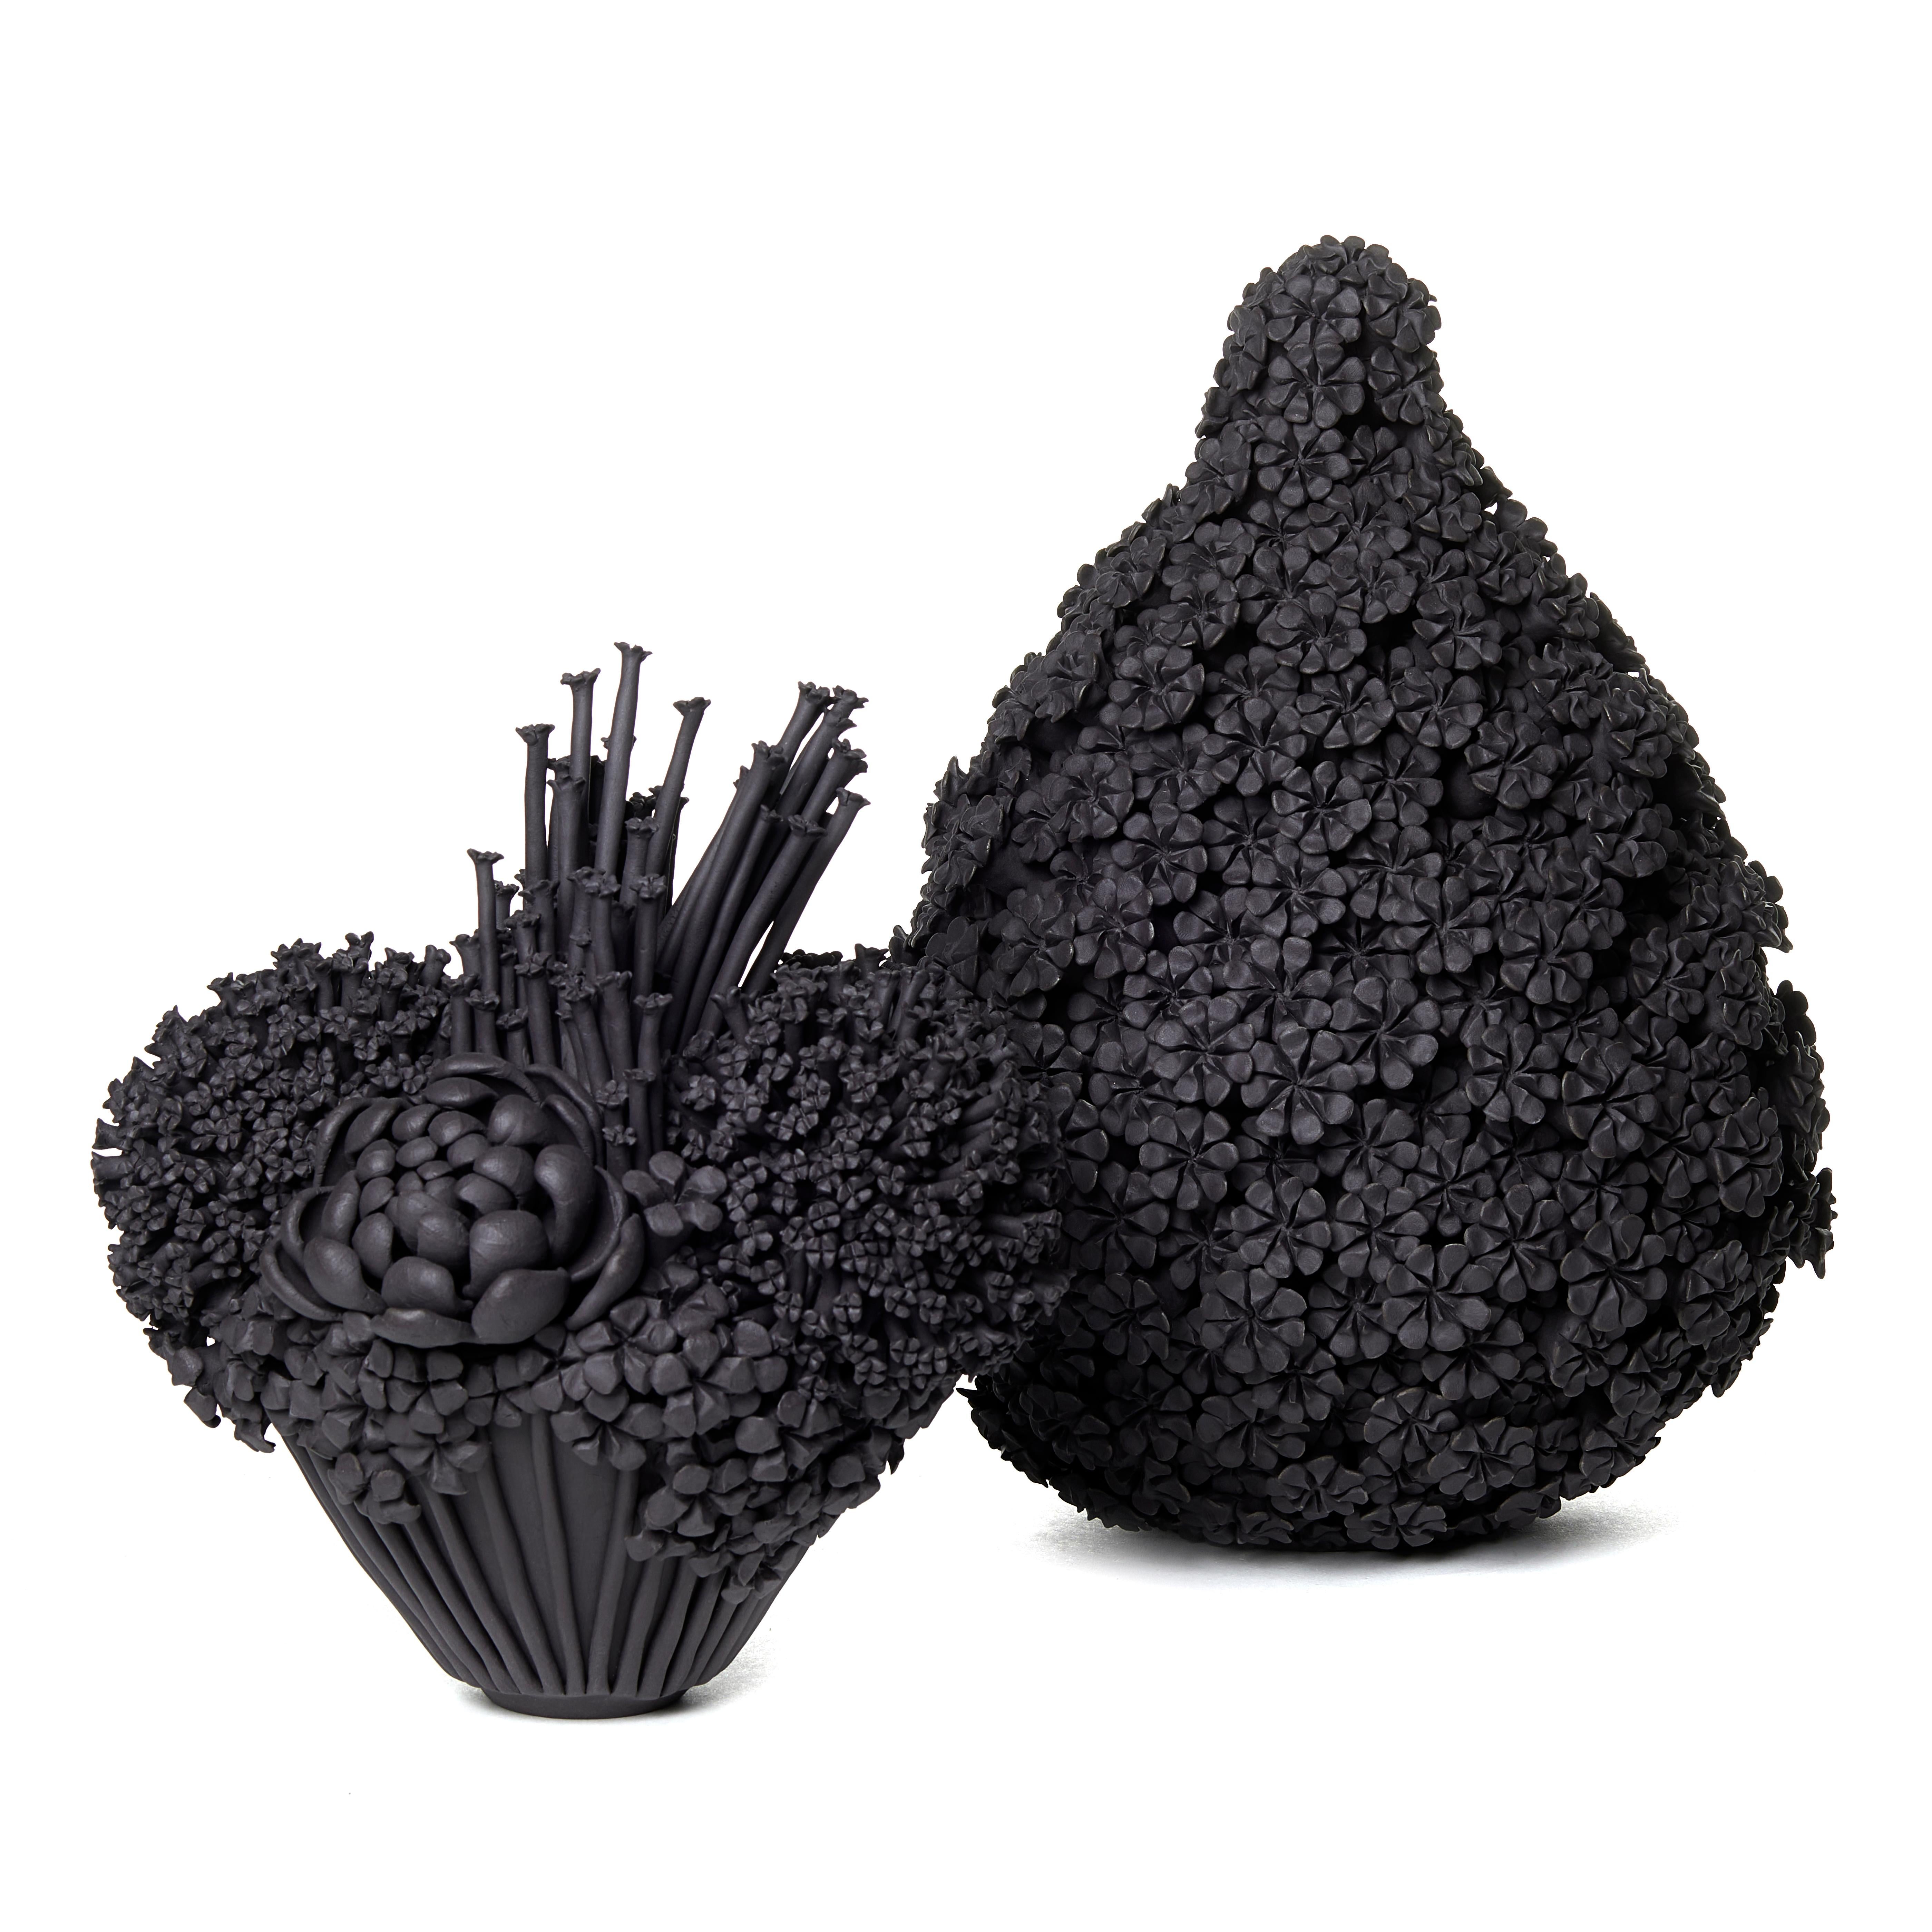 Hand-Crafted Daisy Teardrop, a Floral Black Stoneware Ceramic Sculpture by Vanessa Hogge